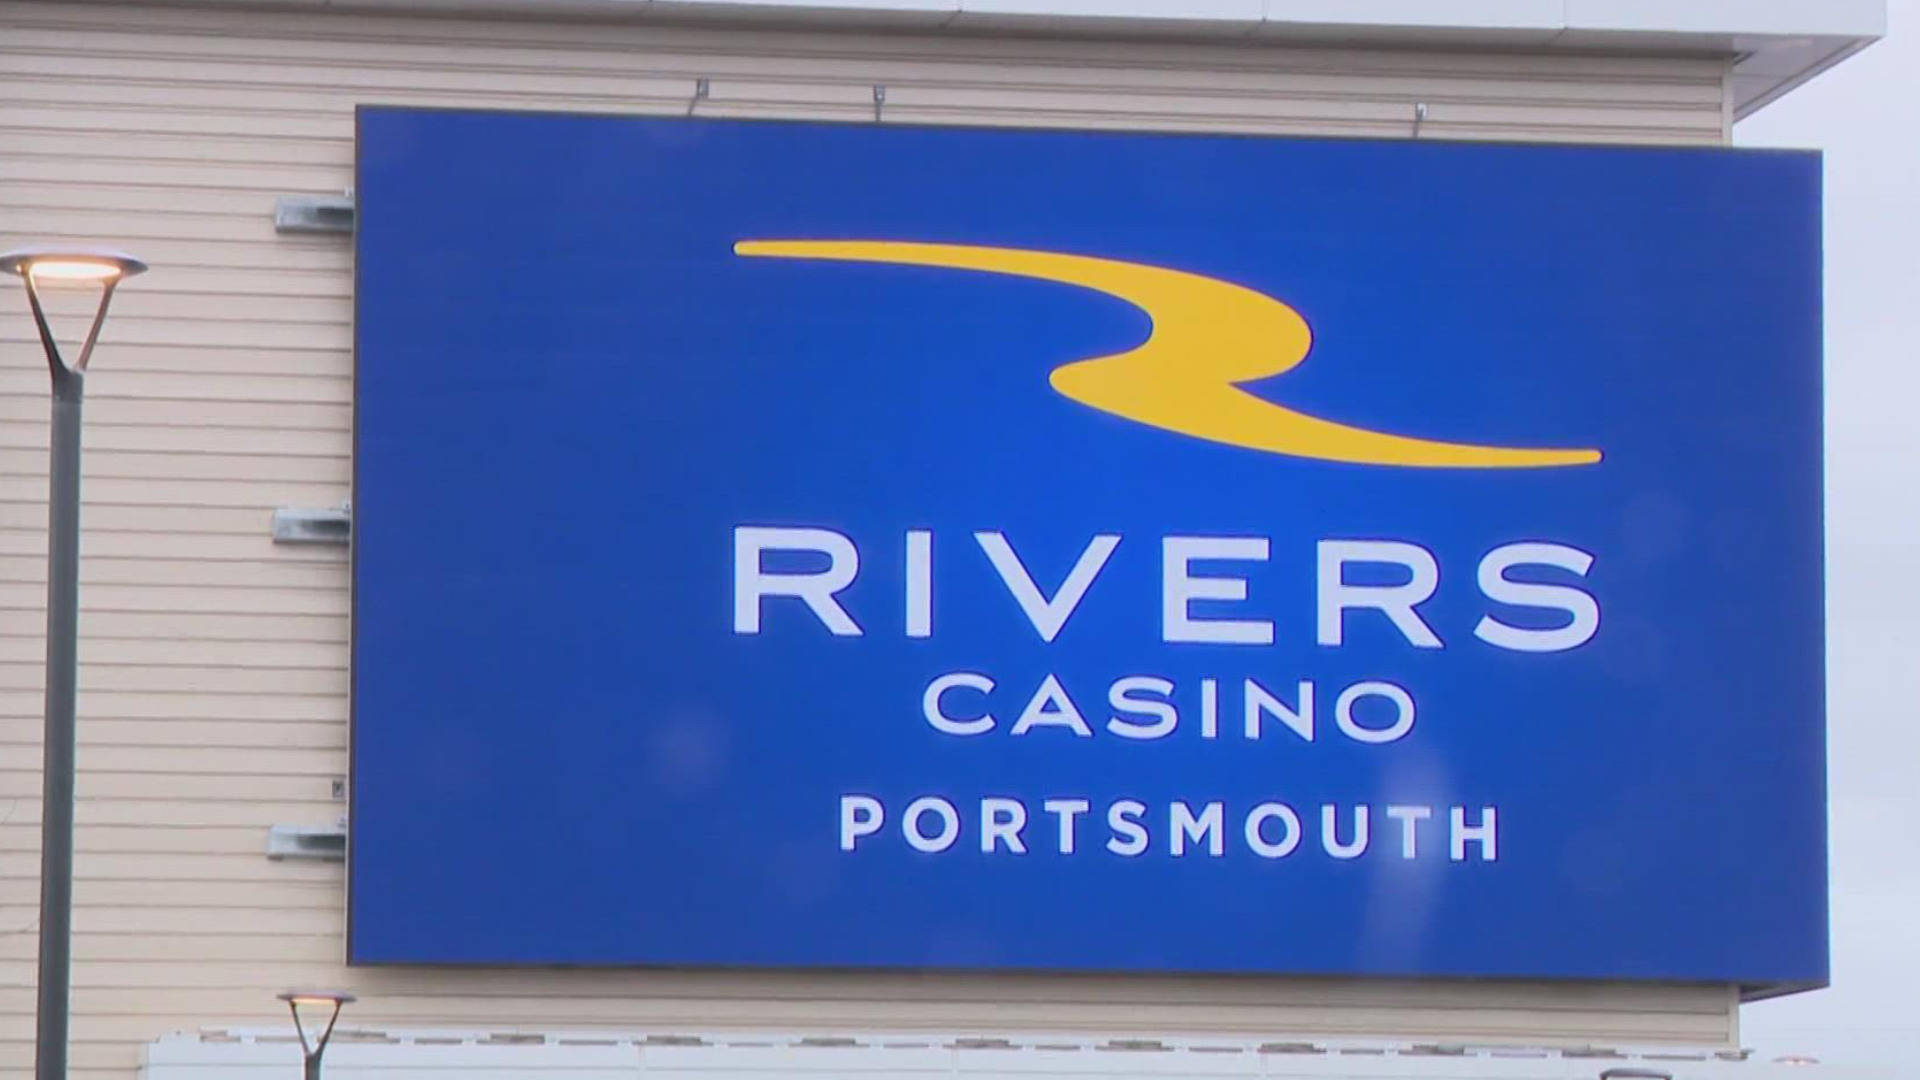 We chatted one-on-one with Portsmouth's economic director and he said the casino instantly becomes one of - if not the largest - private sector employer for the city